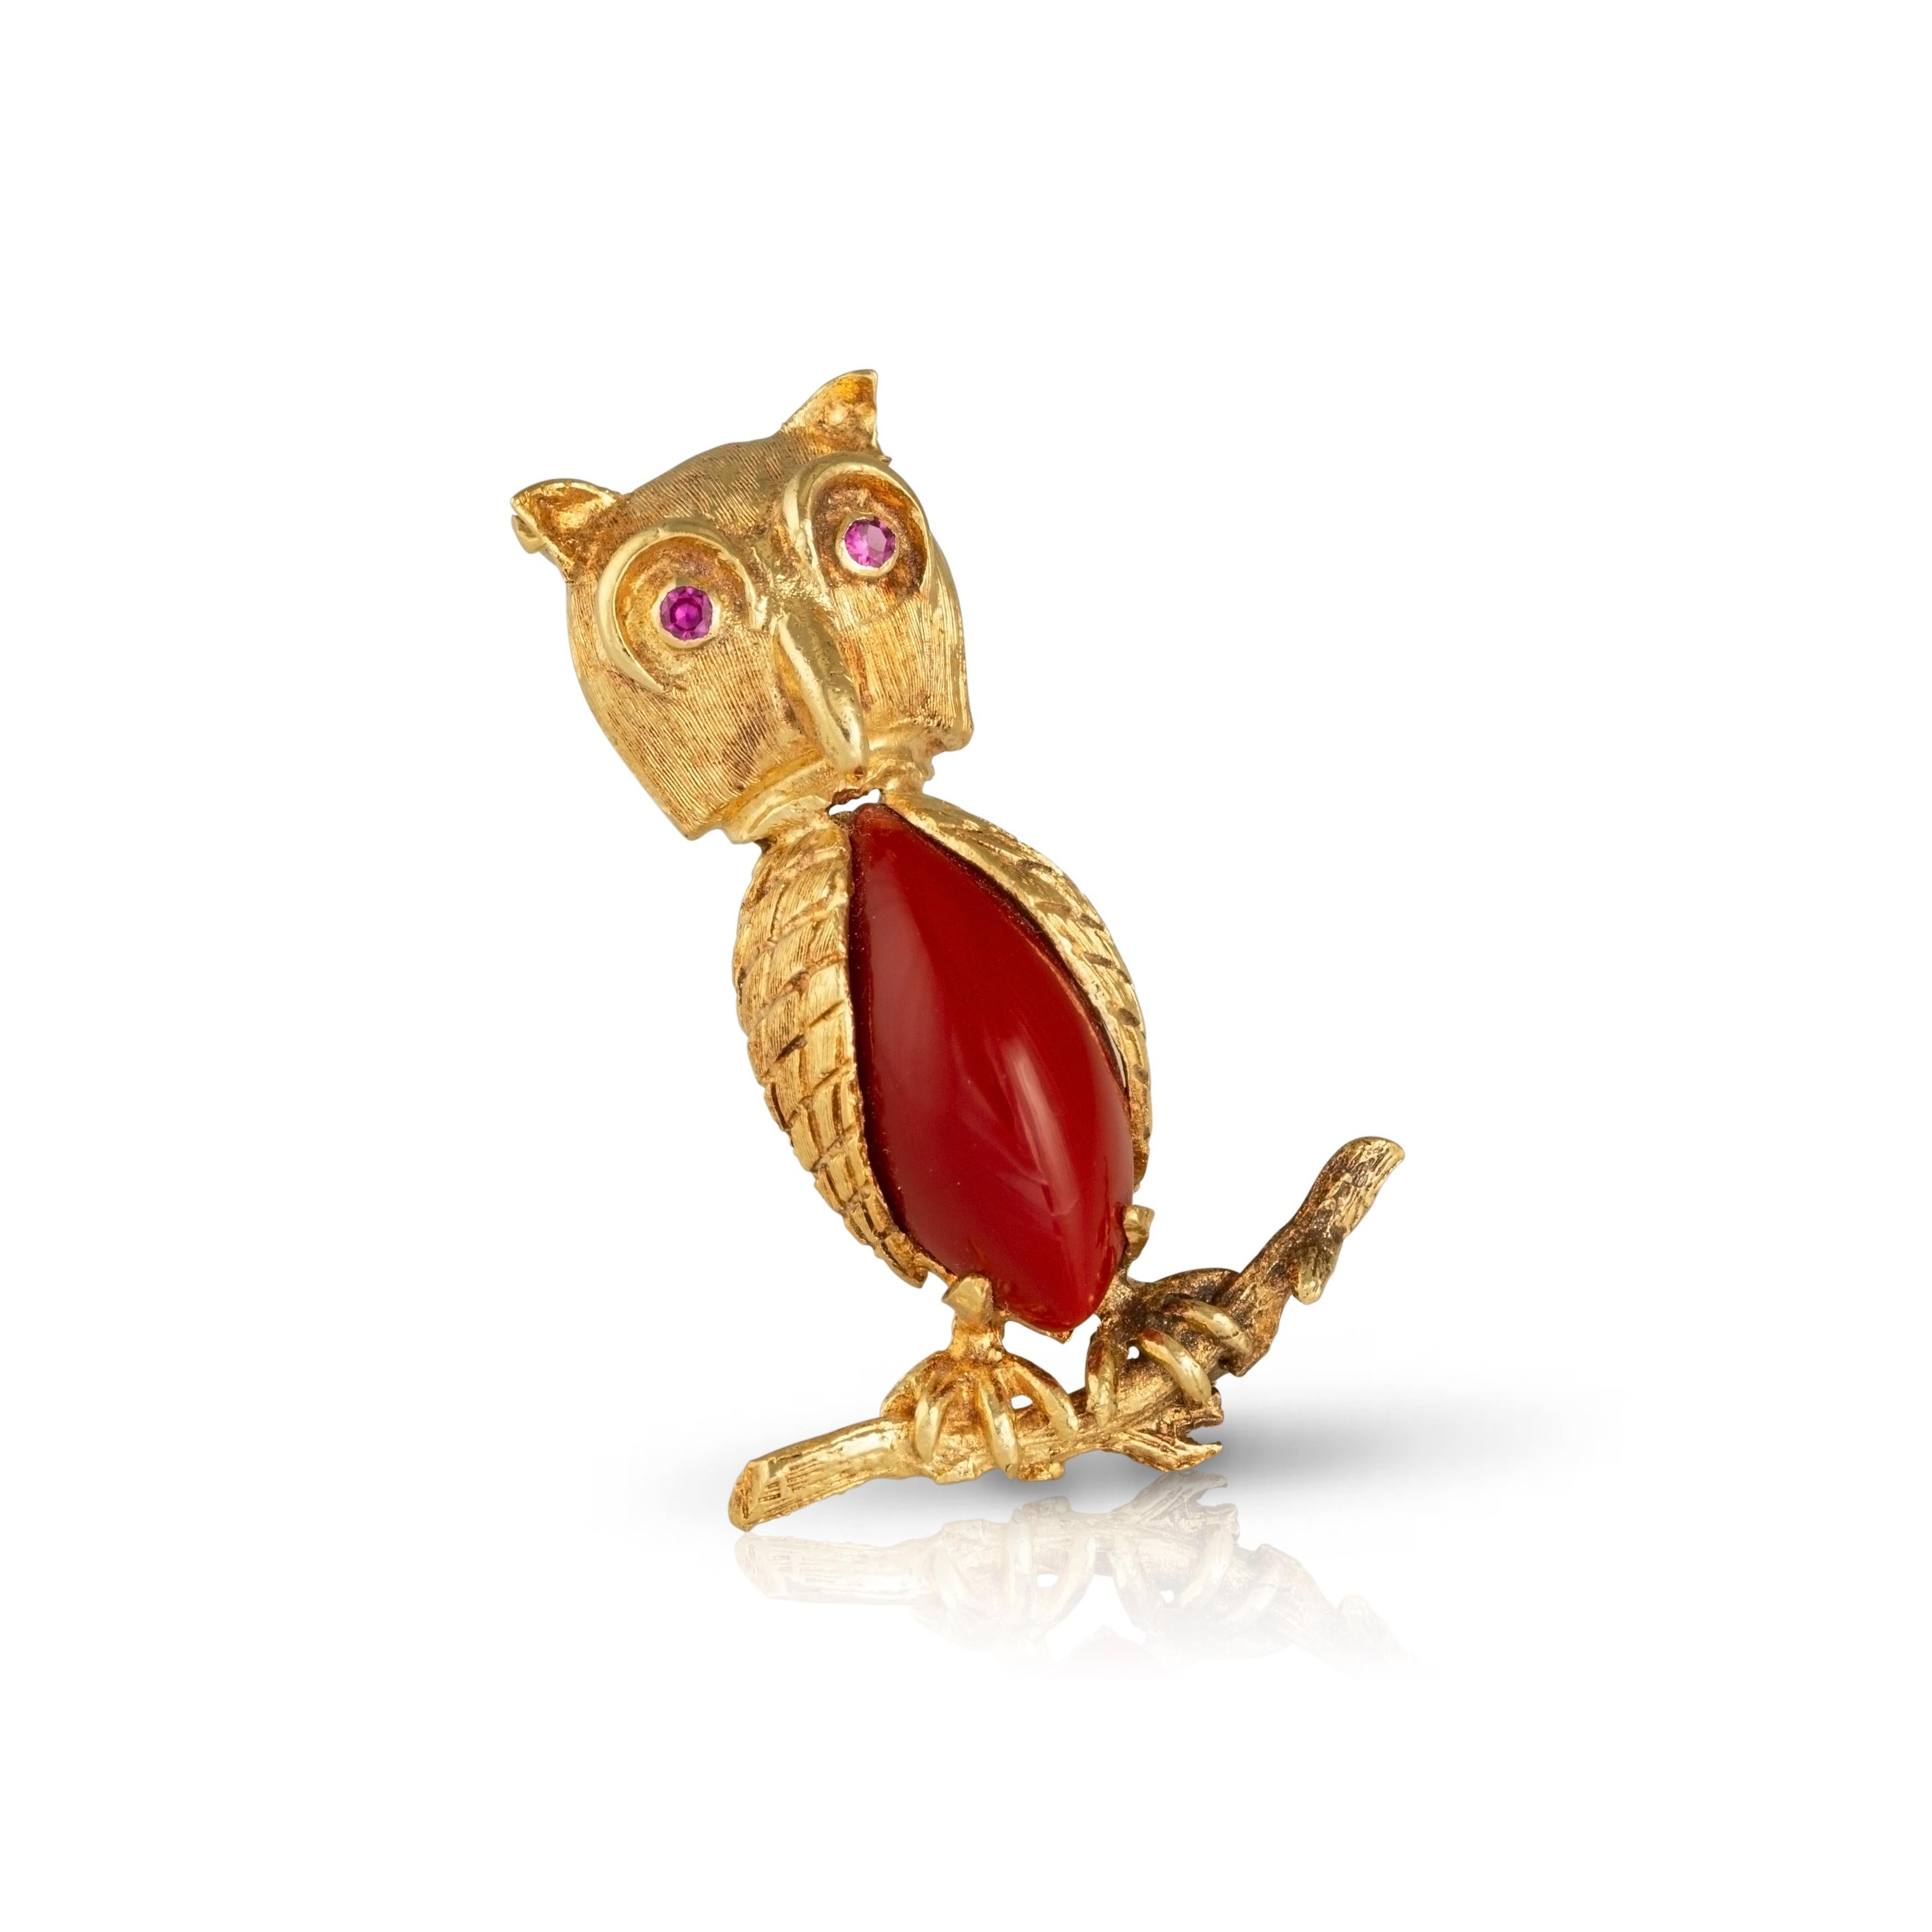 Modern Vintage 18ct Gold Owl Brooch with Red Glass and Ruby